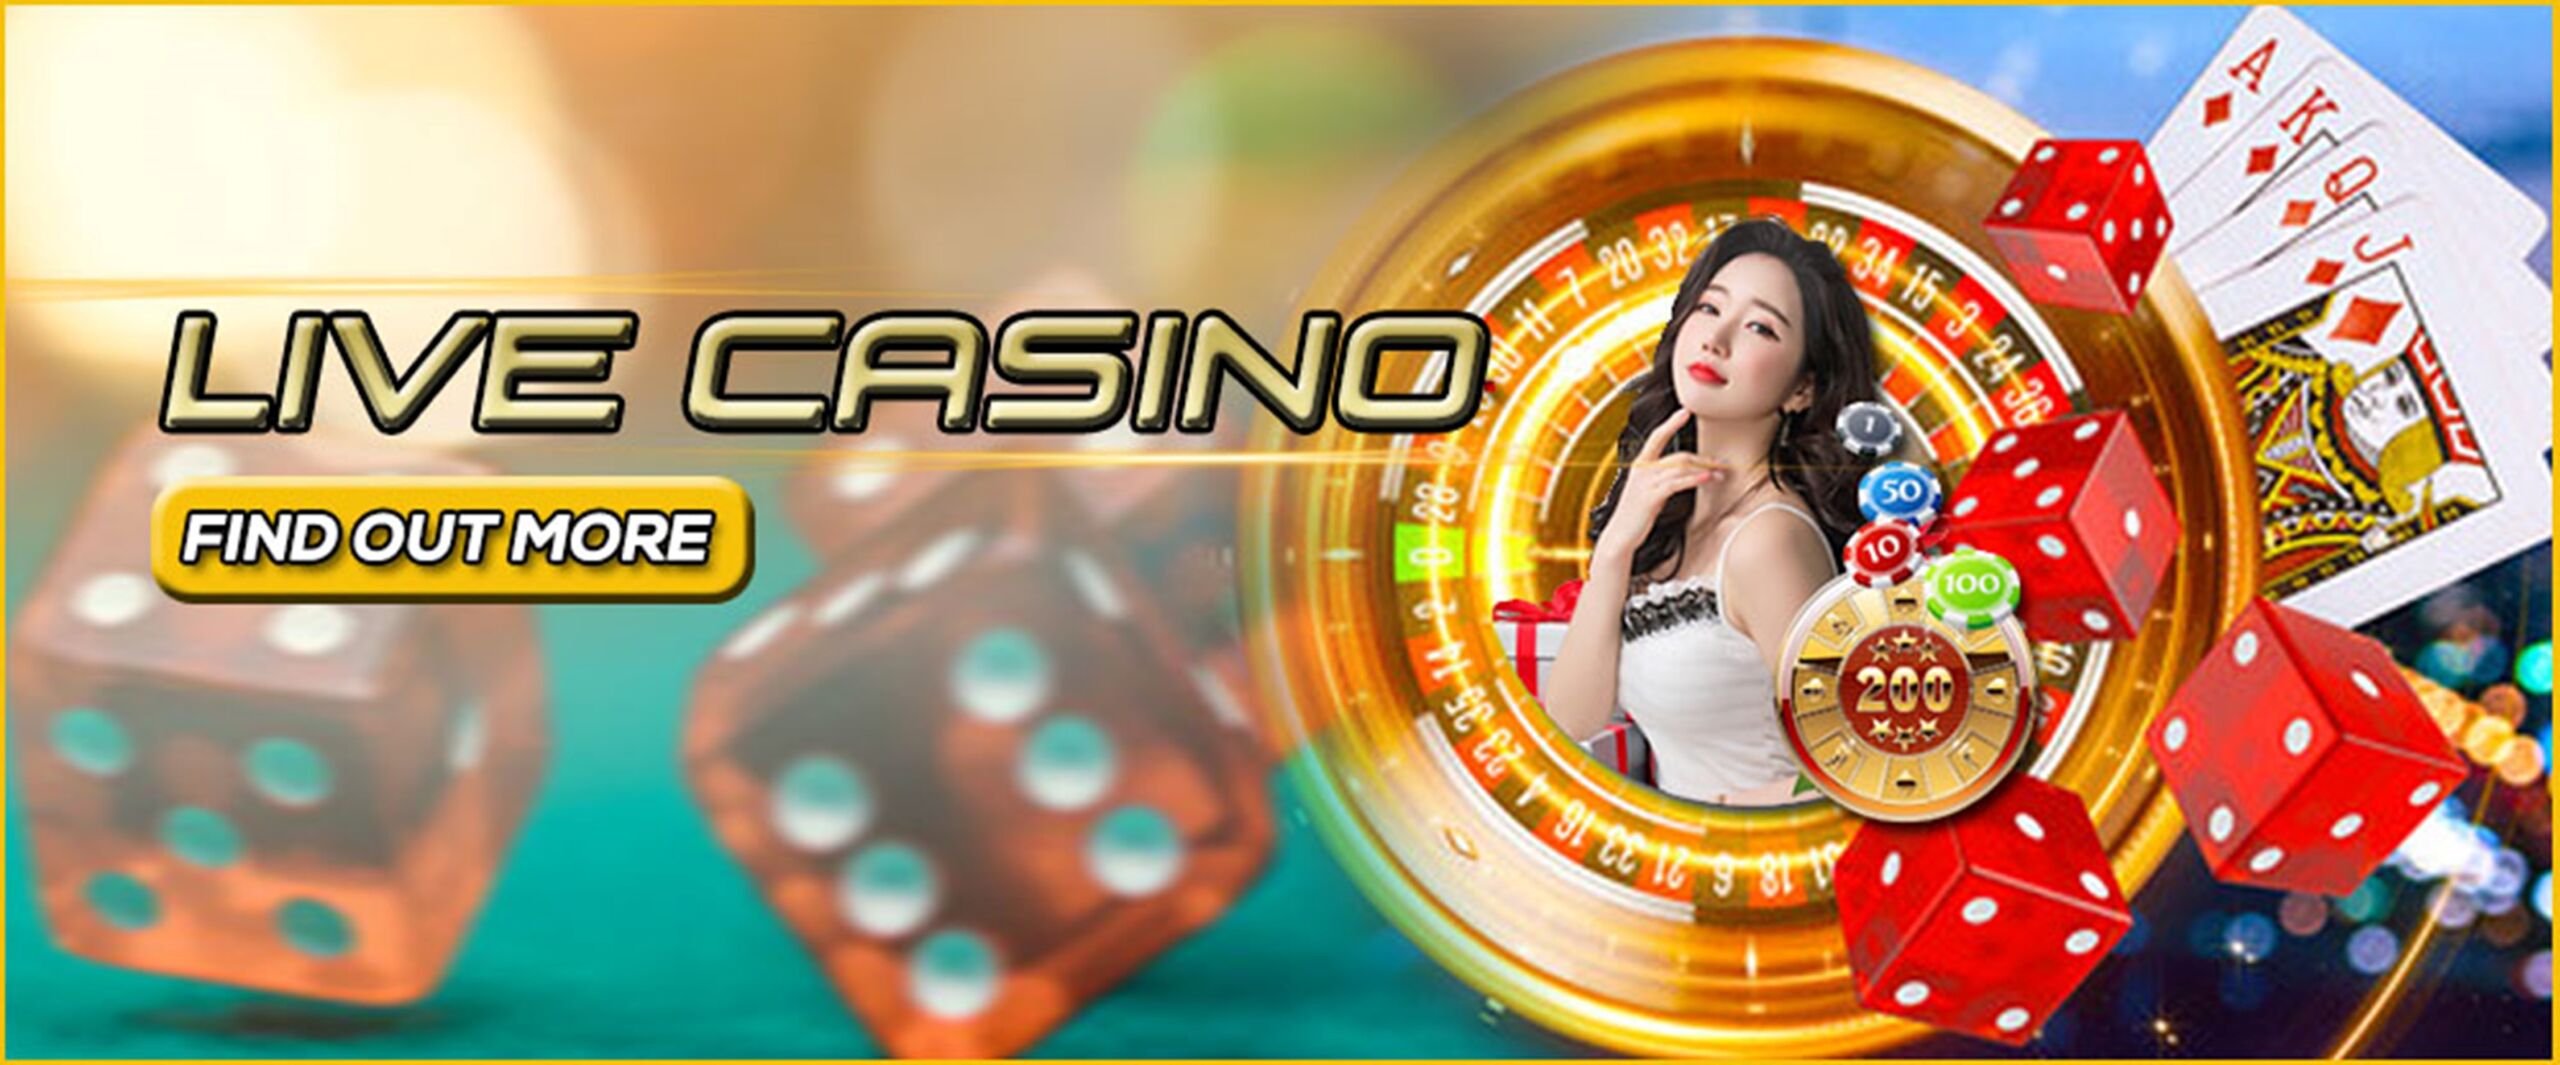 Top 5 Live Casinos Online in Singapore